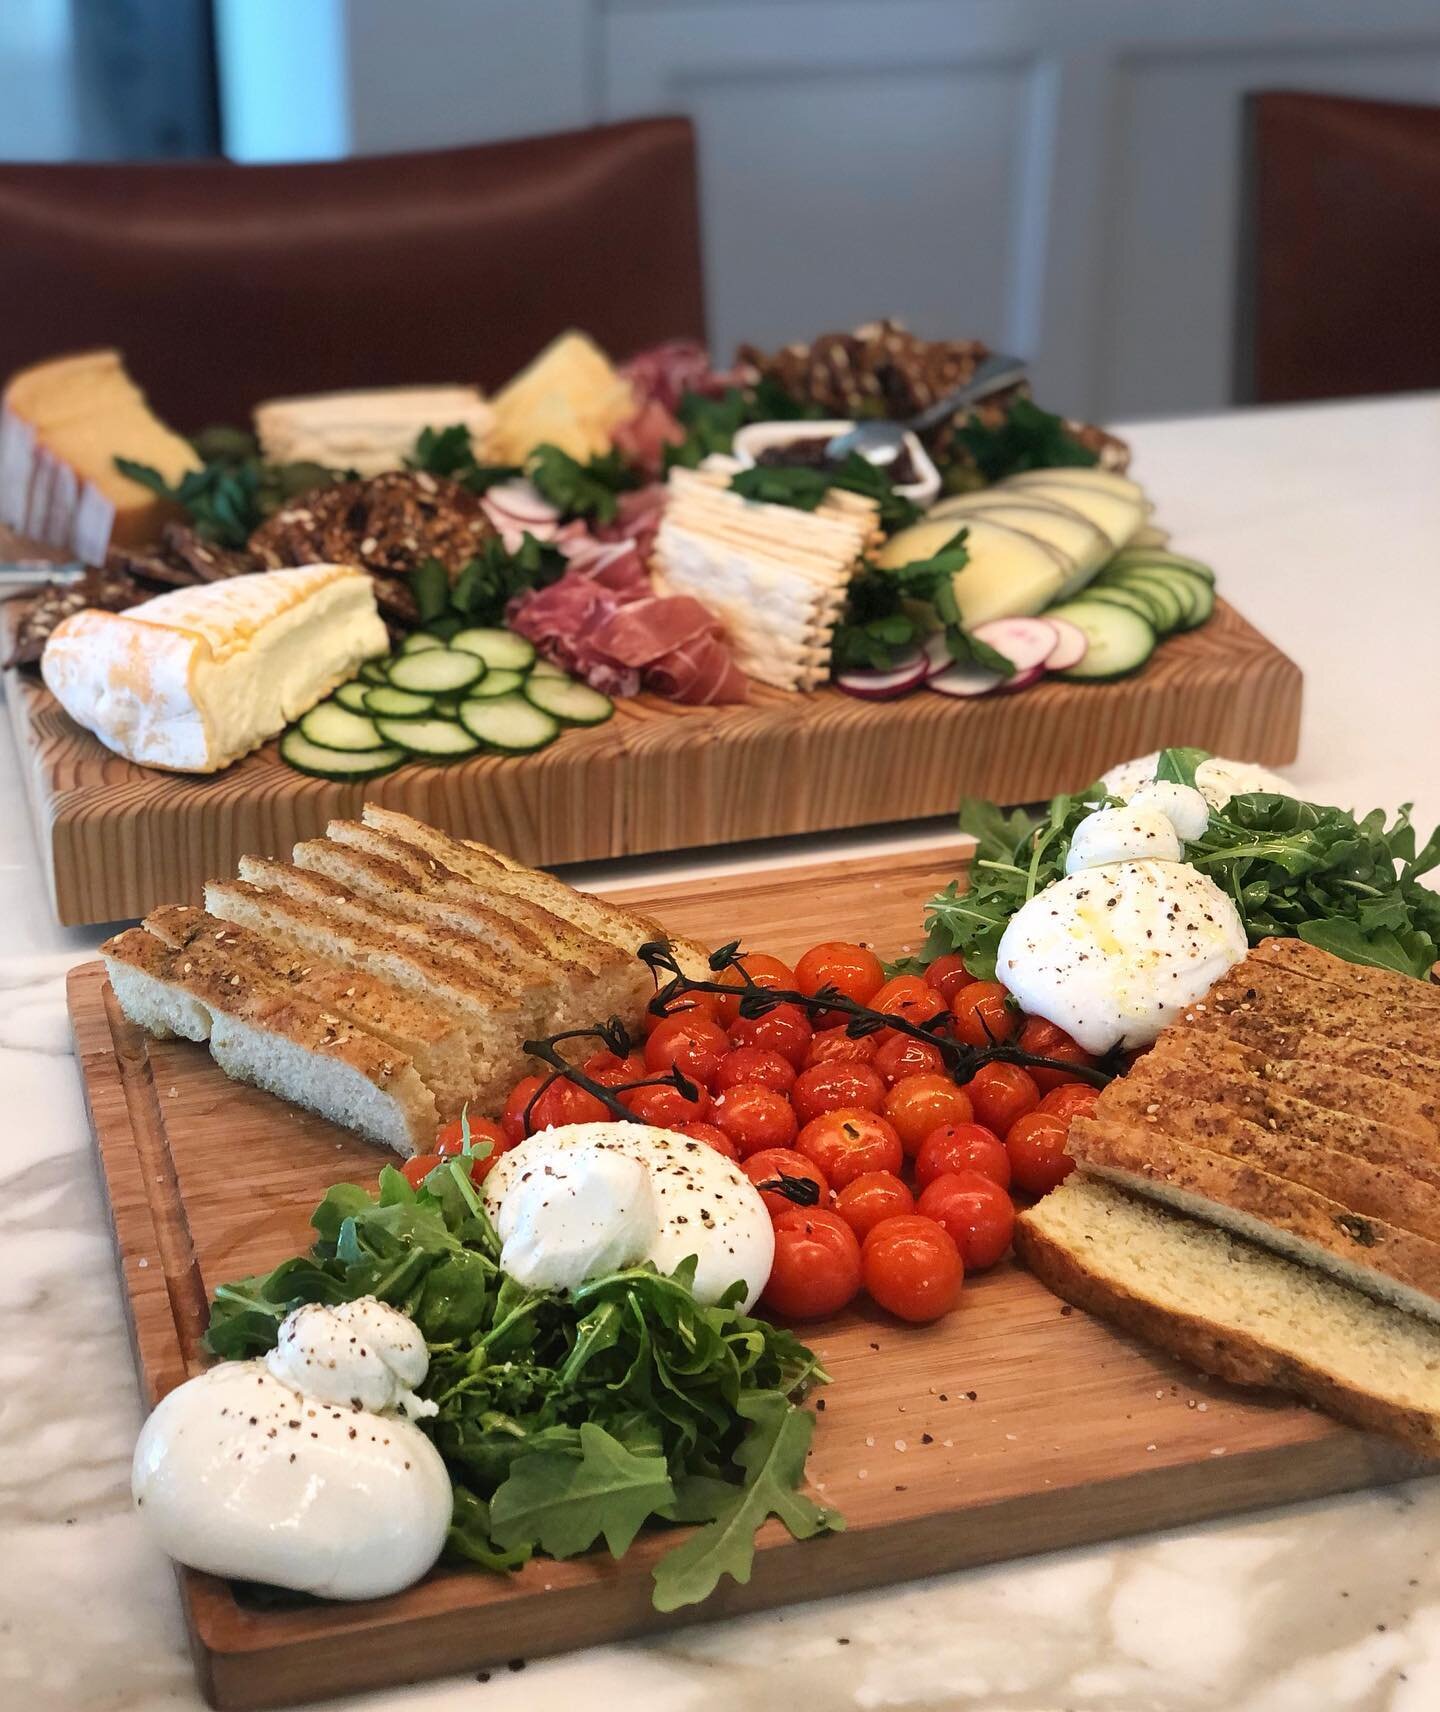 CHEESE BOARDS: 
Smoked Gouda, Parm &amp; Triple Cream🧀
Prosciutto 🍖
Fig jam 🍇
Assorted accoutrements 🥒🥕
Roasted tomatoes 🍅 
Fresh Burrata cheese 🧀 
Homemade Focaccia Bread 🥖 
#charcuterie #appetizer